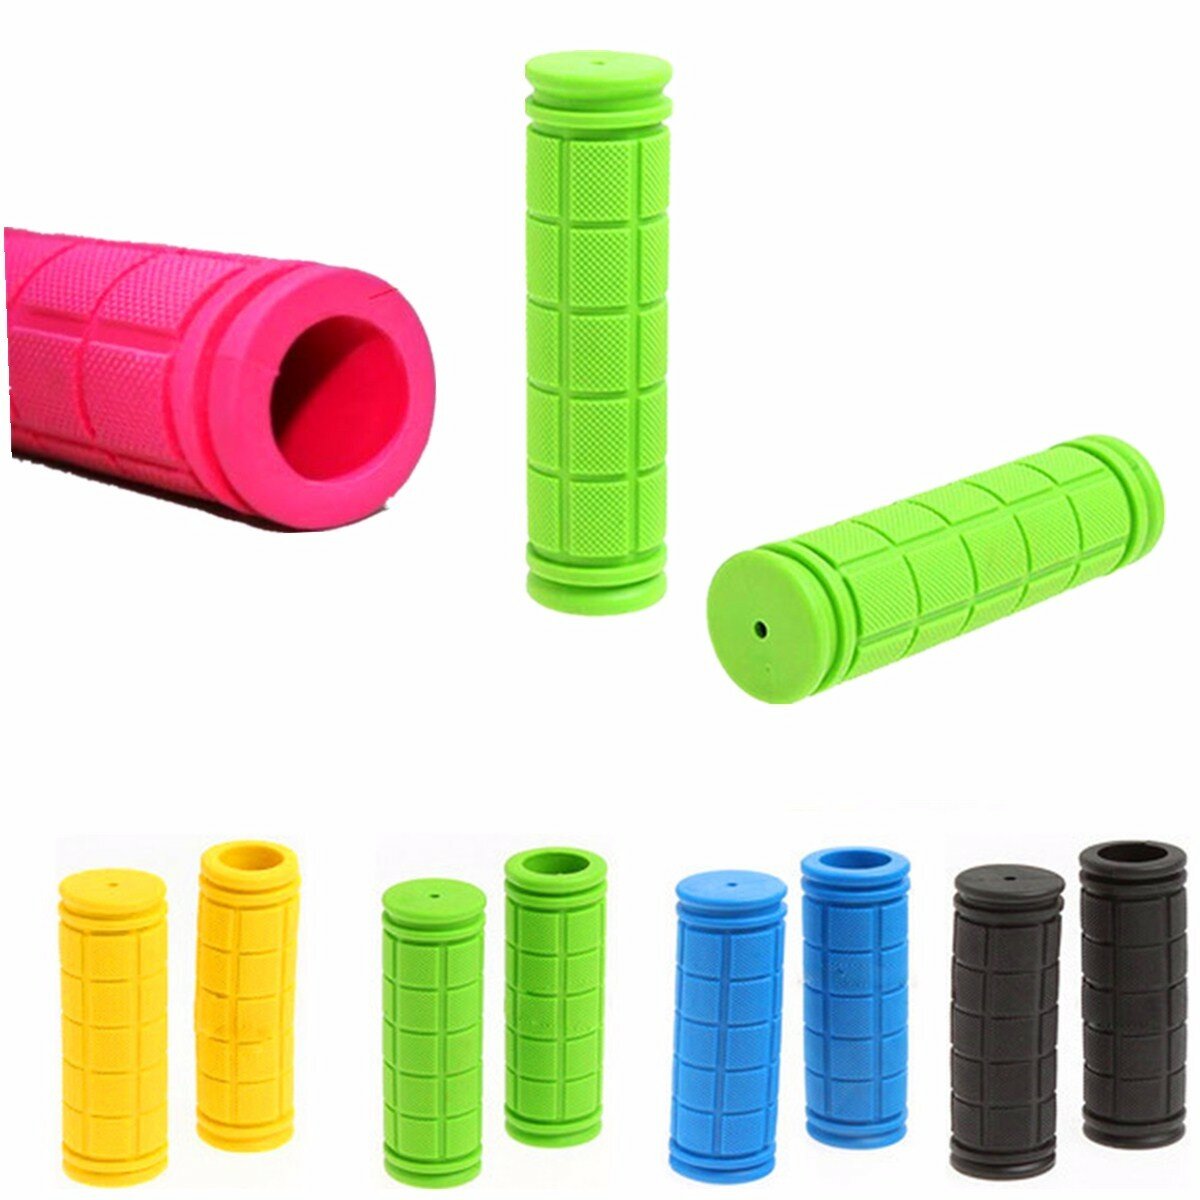 1 Pair Cycling Bike Bicycle MTB Fixie Lock-on Fixed Gear Rubber Handlebar Grips